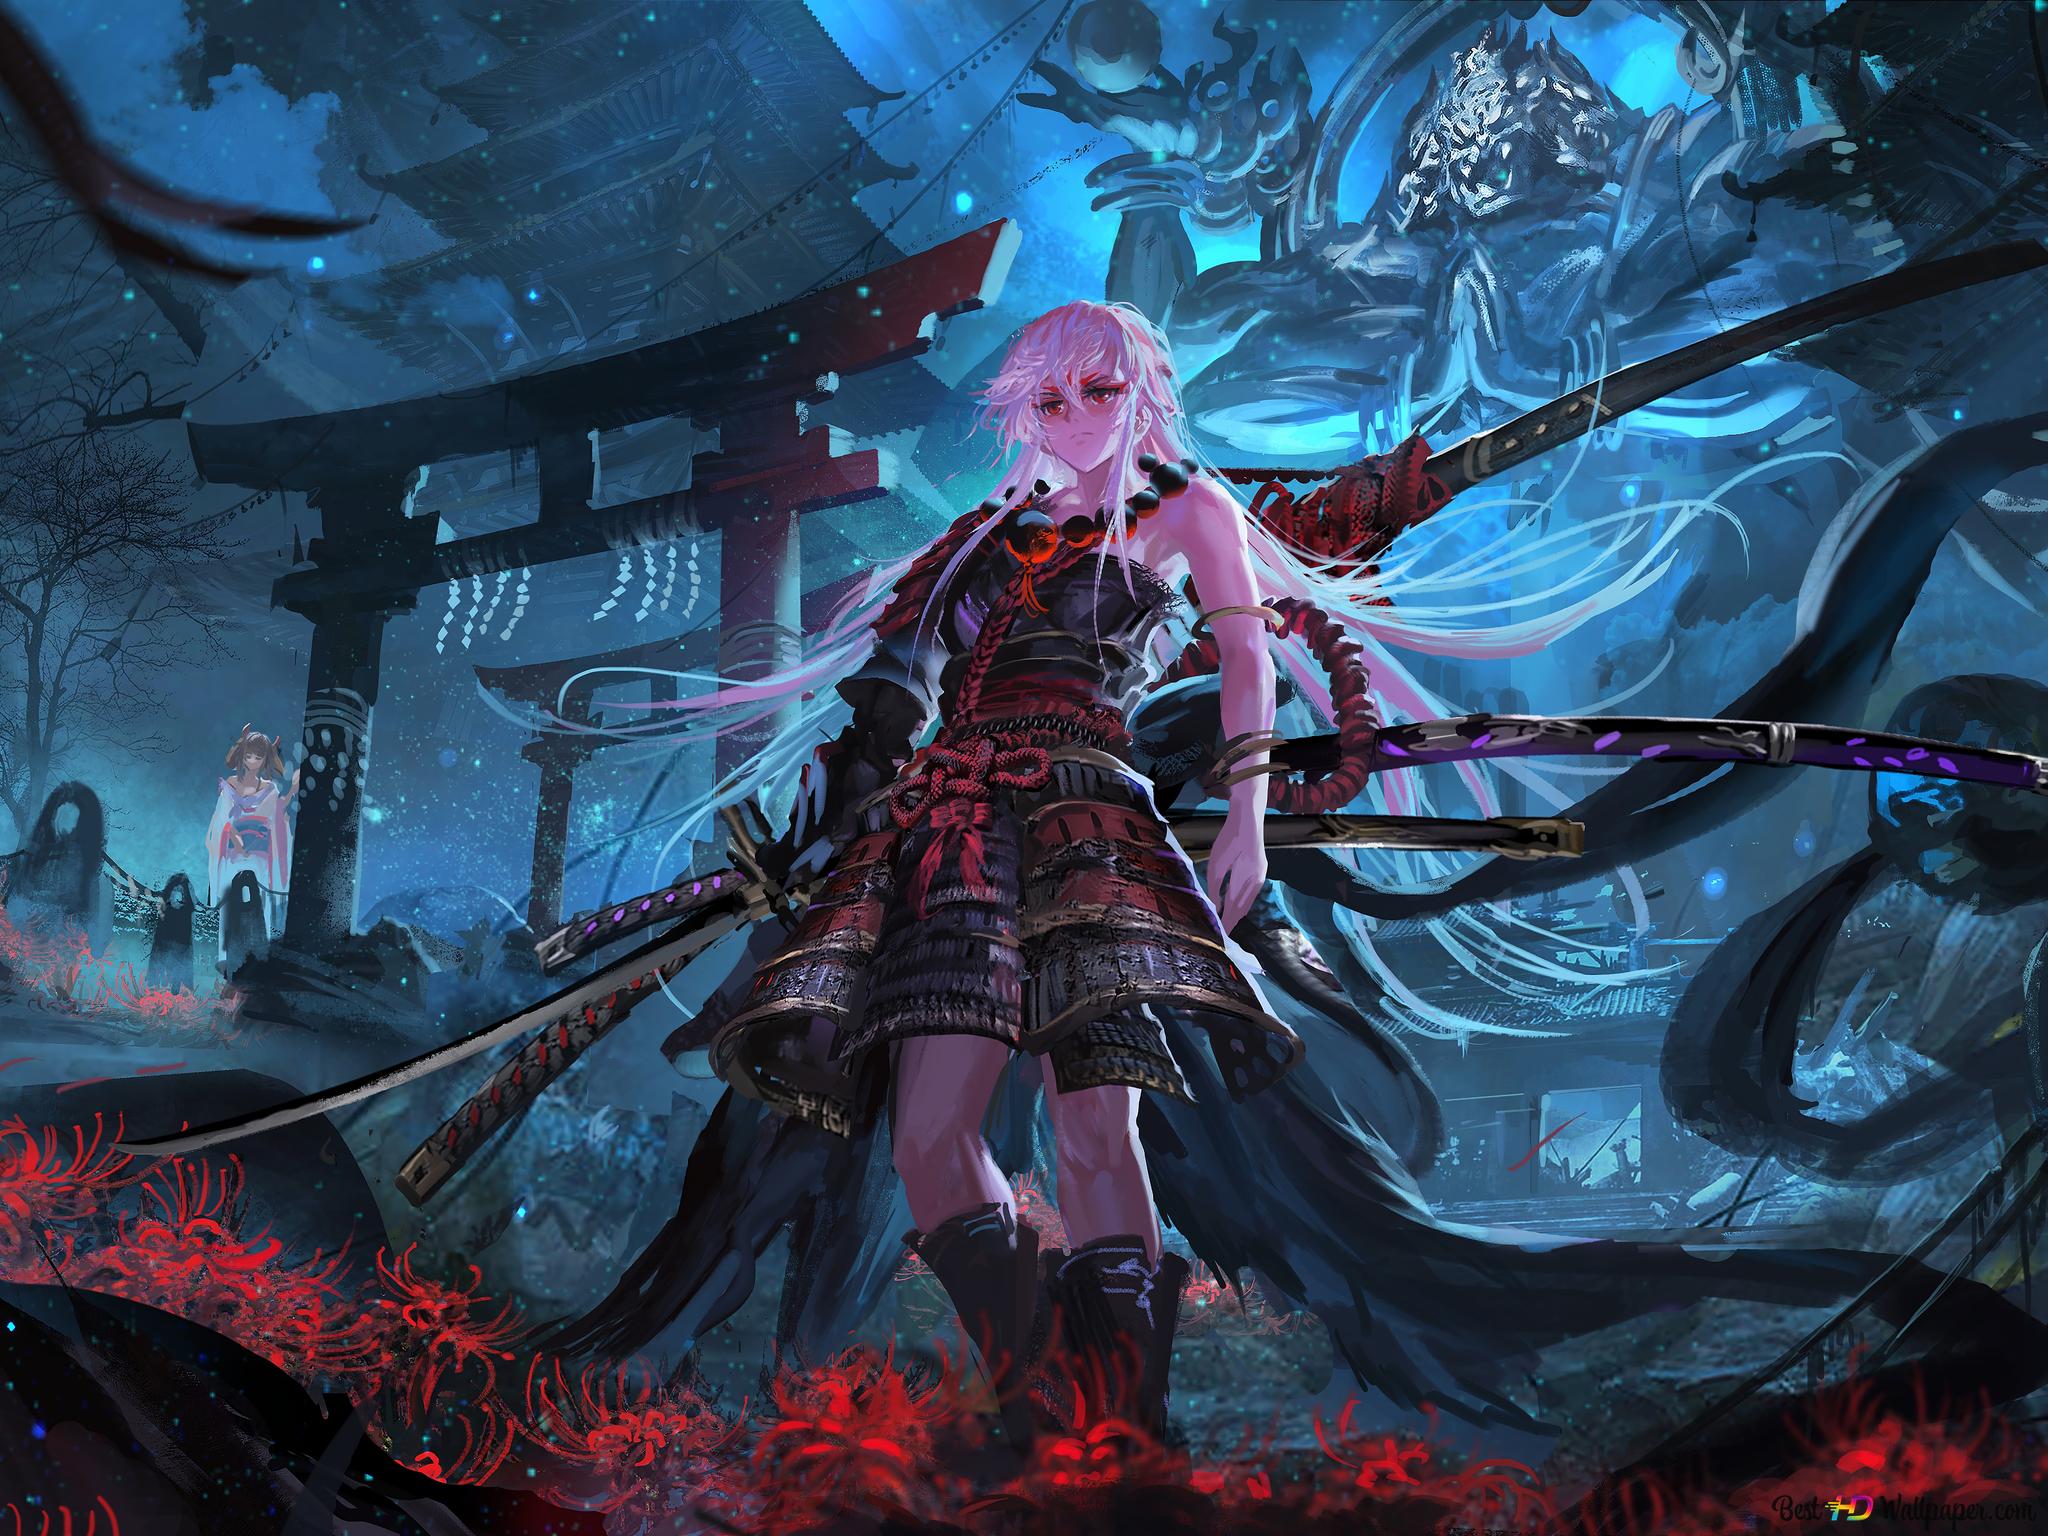 Anime samurai wallpaper by ShadowXGhostly - Download on ZEDGE™ | 1c33